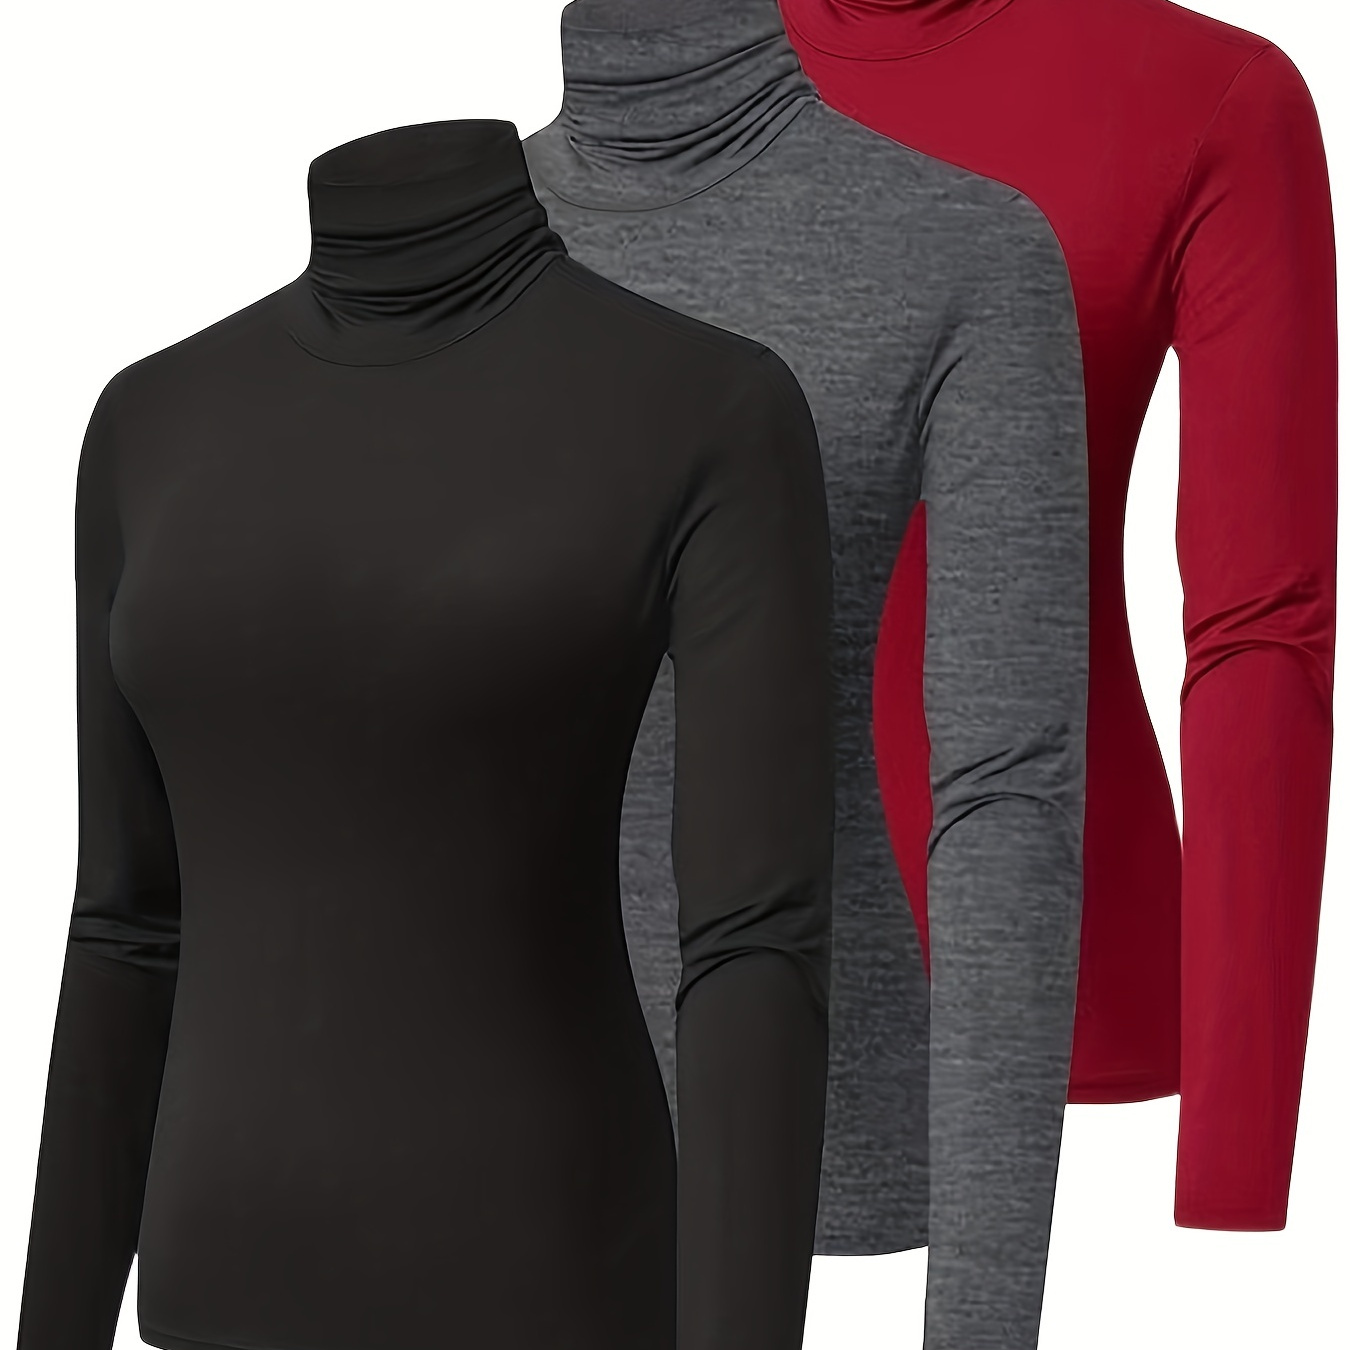 

3 Packs Turtleneck T-shirts, Casual Long Sleeve Top For Spring & Fall, Women's Clothing